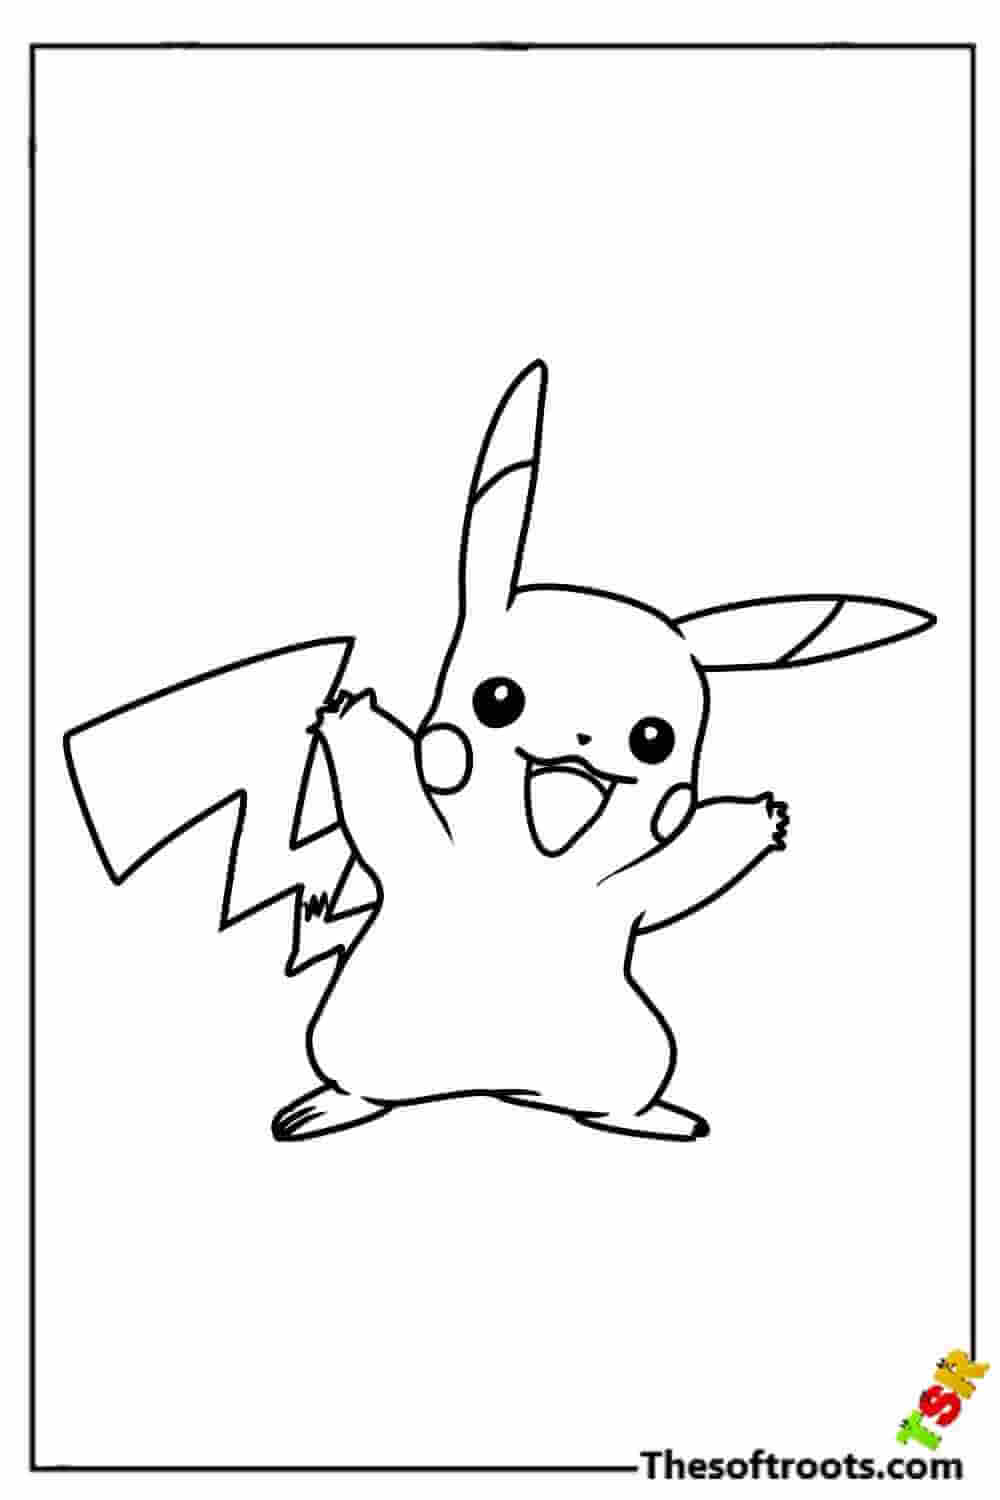 Printable Pikachu coloring pages